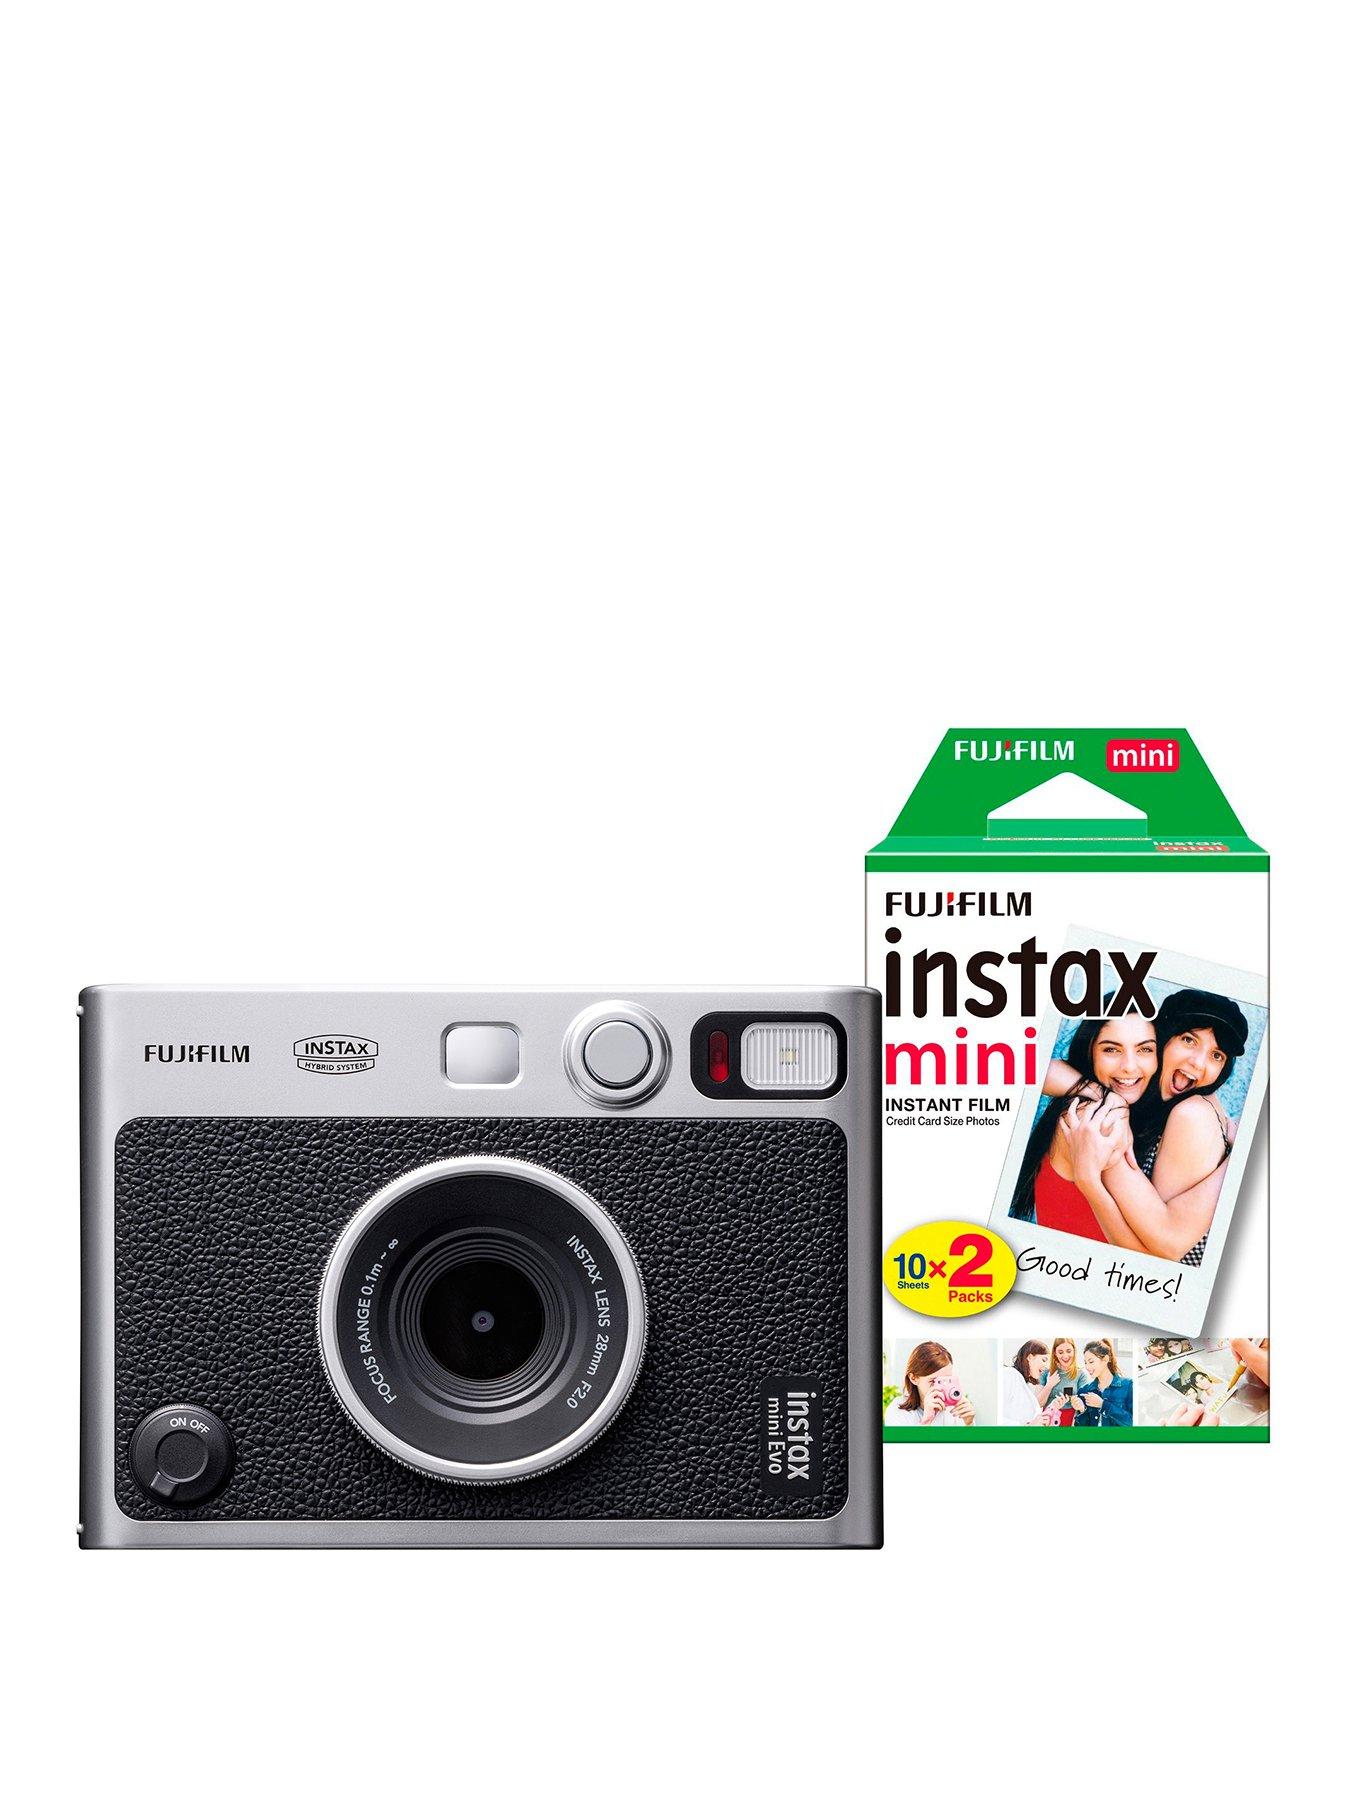 Fujifilm's new Instax Mini Evo Hybrid is an instant camera with 10  integrated lenses and 10 film effects: Digital Photography Review